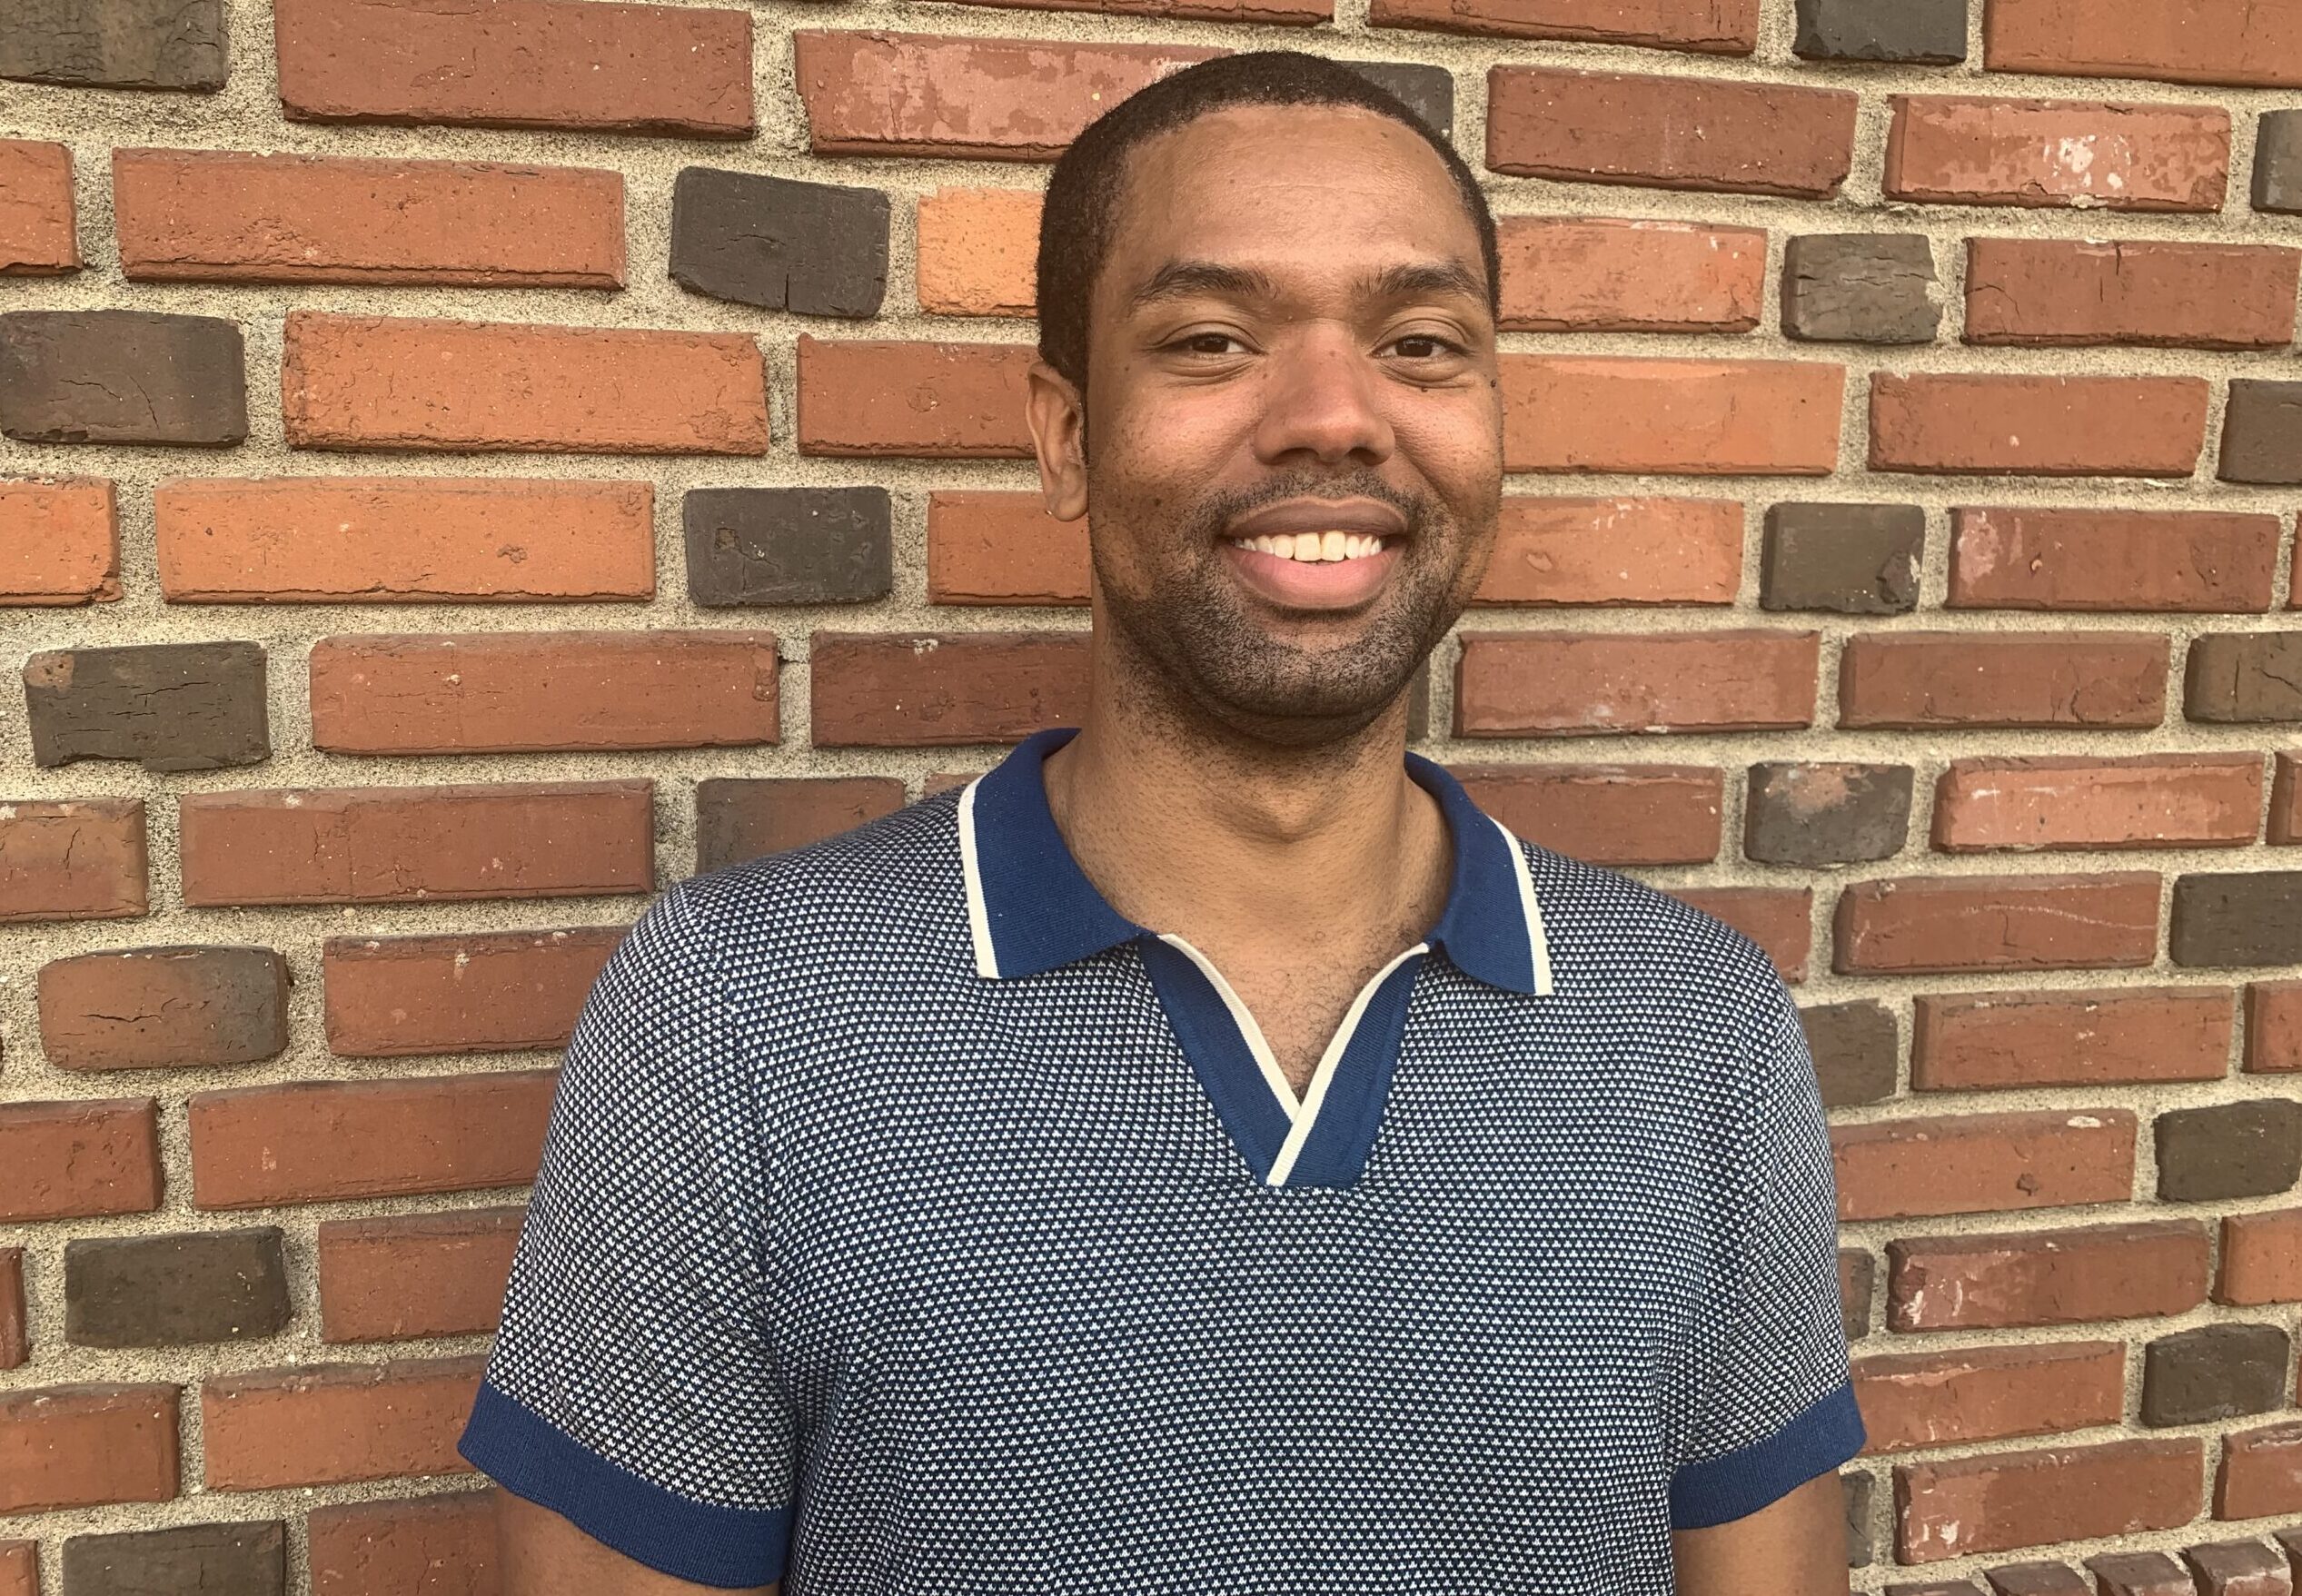 Tremayne standing in front of a brick wall, wearing a blue collared shirt